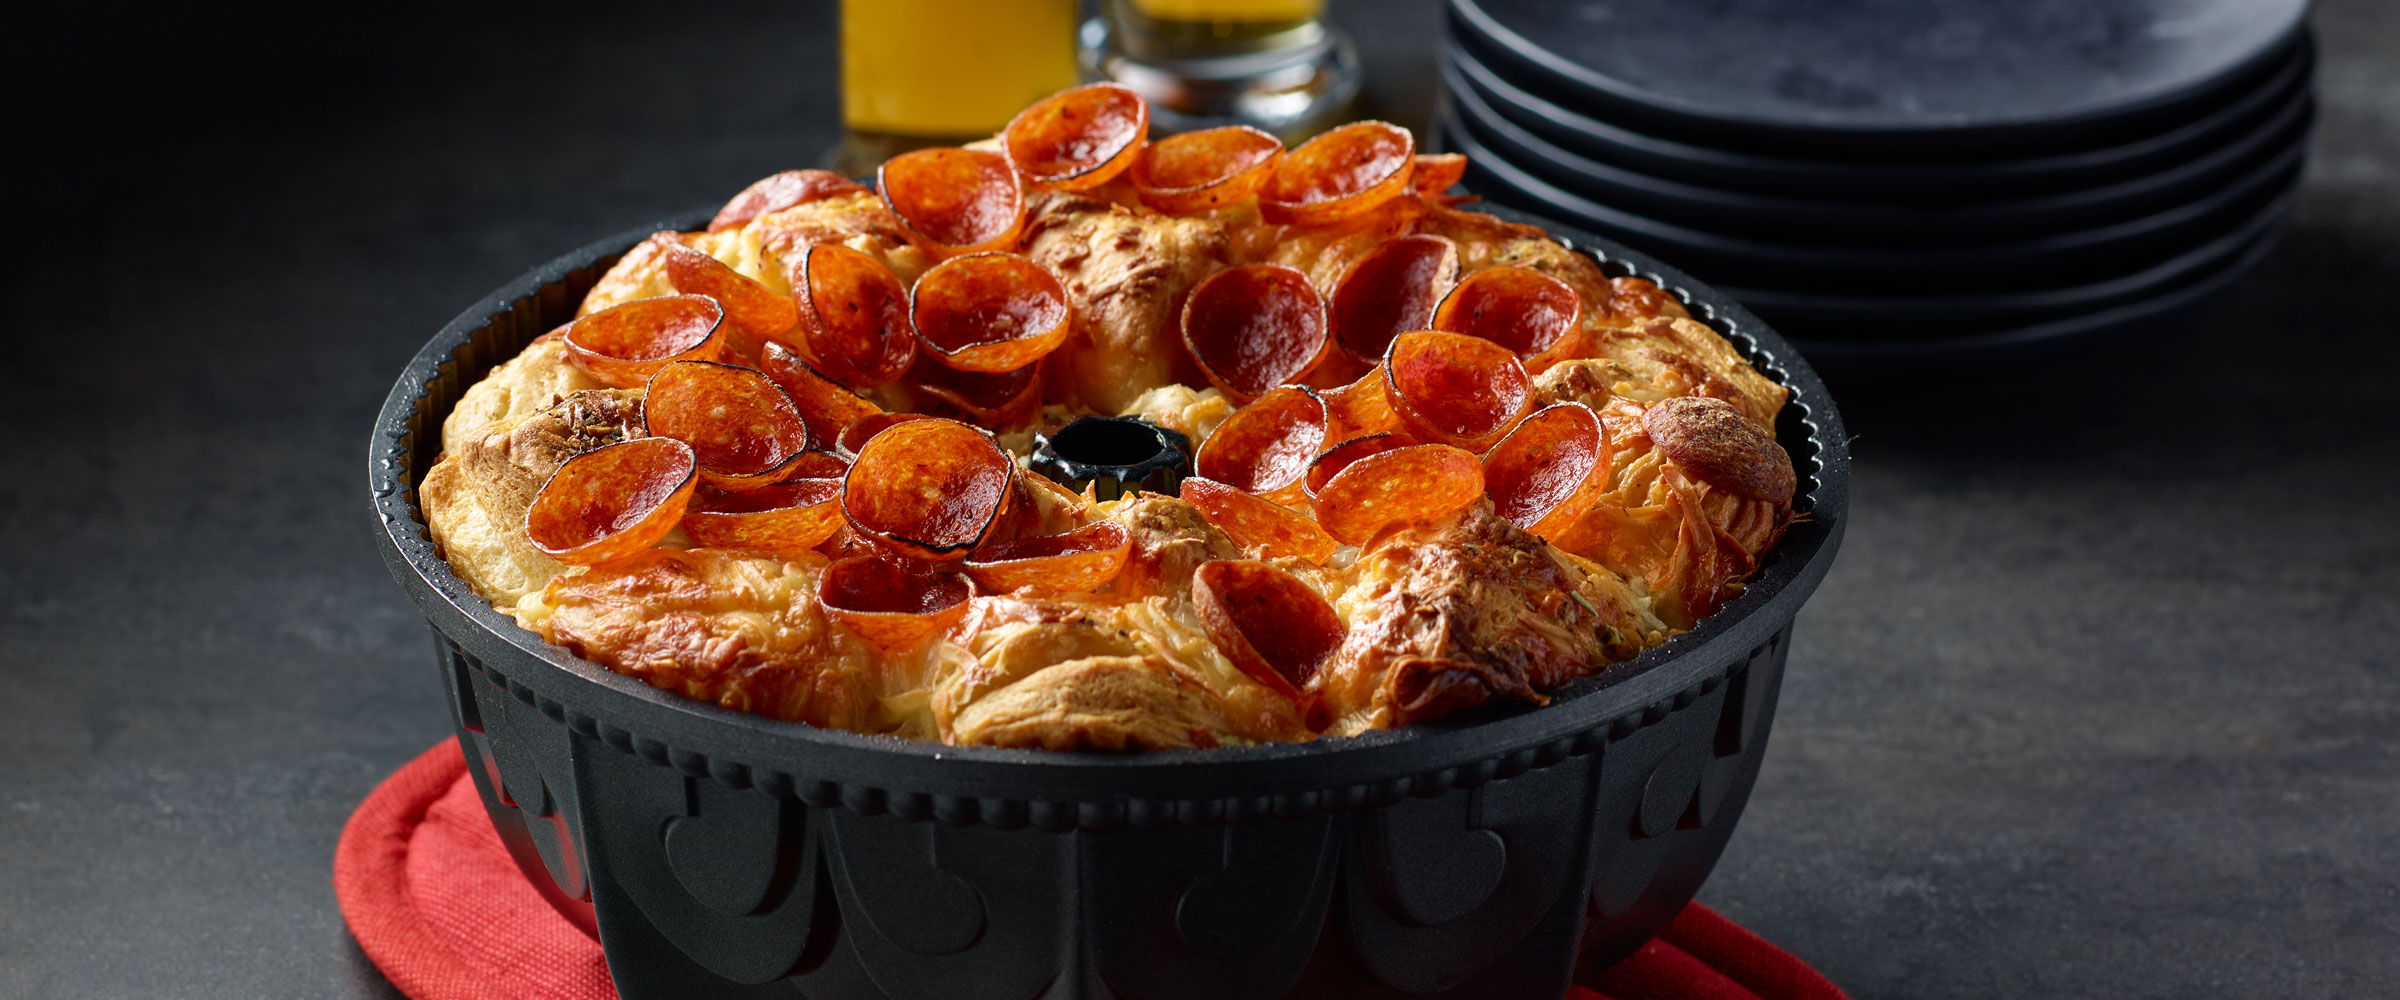 Cup N’ Crisp Pepperoni Pull Apart Bread in black dish on red pot holder